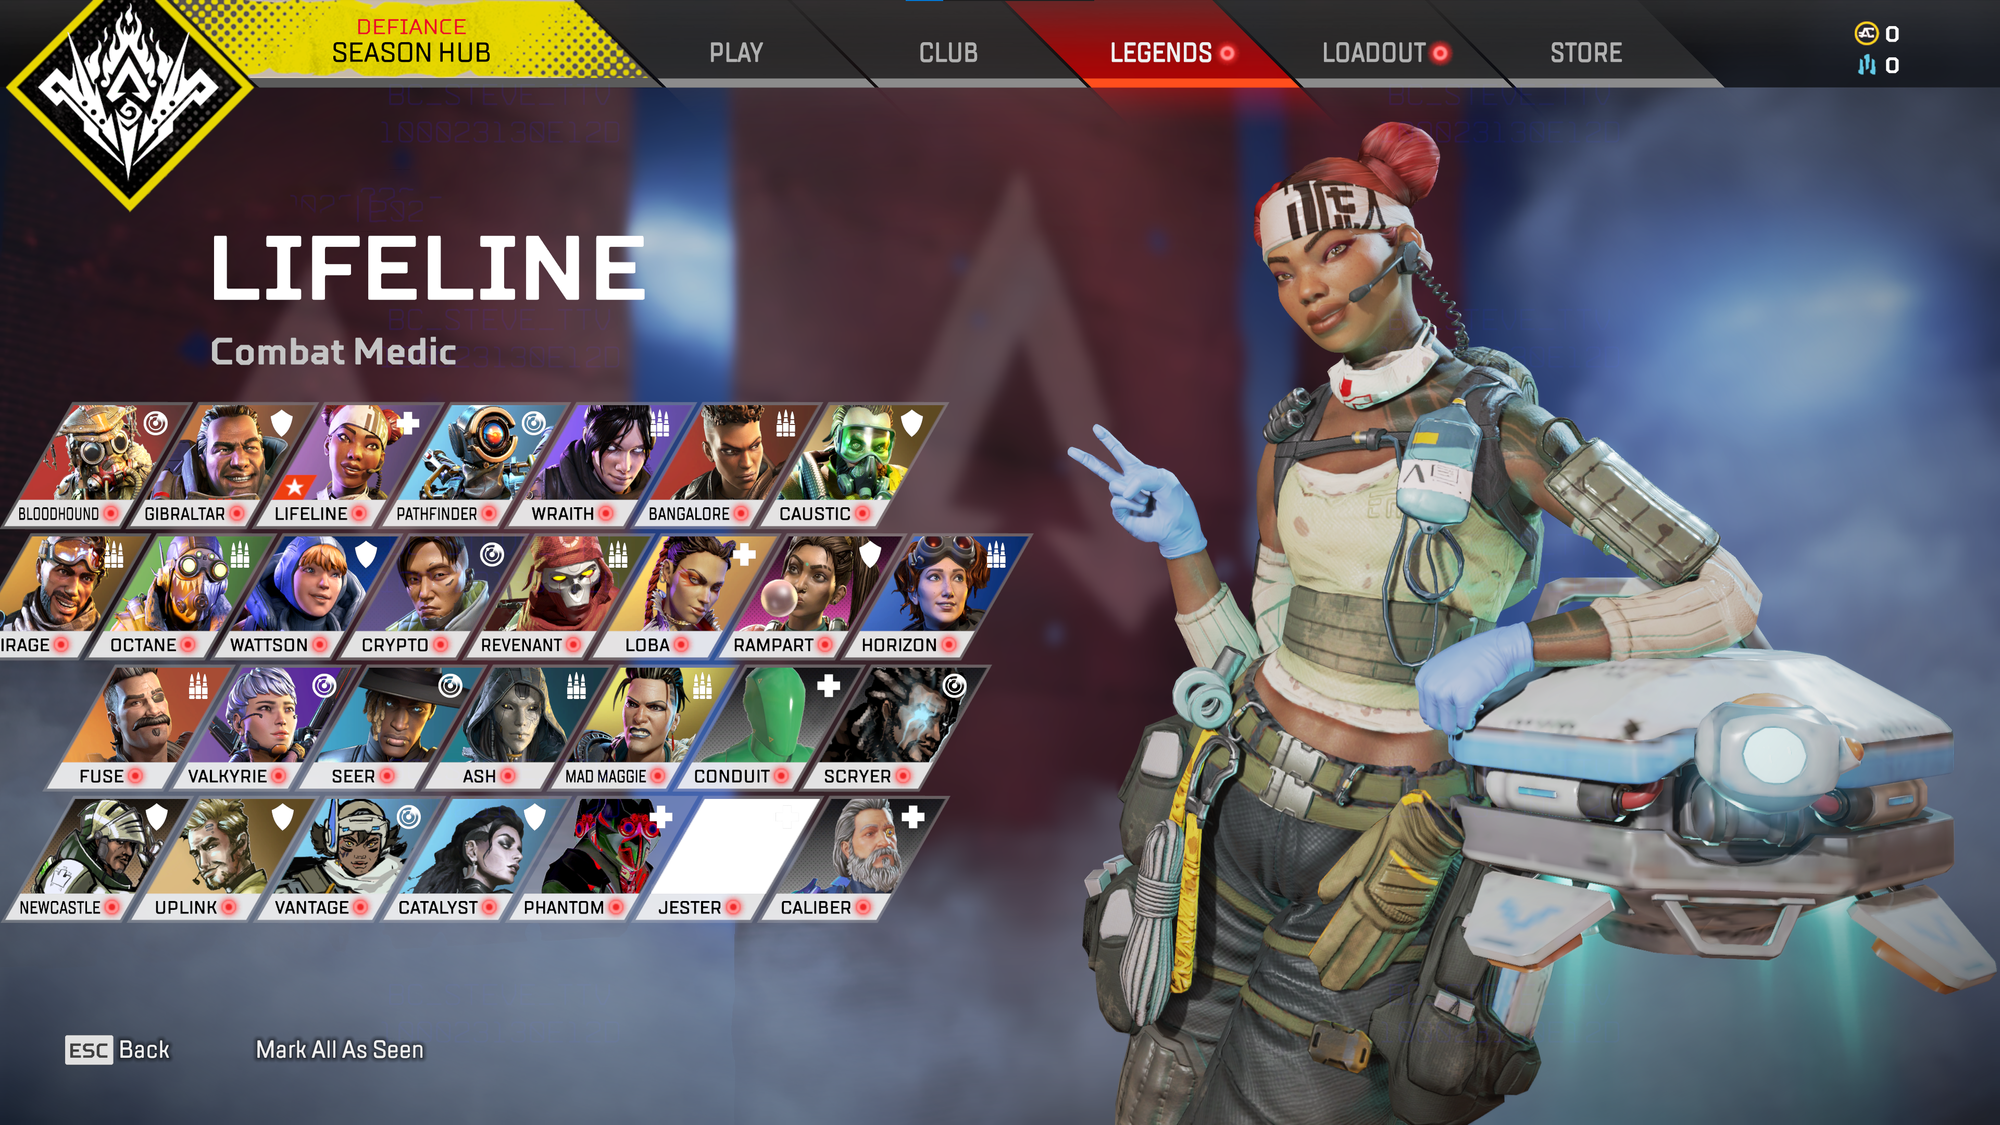 Years of potential content leaked for Apex Legends